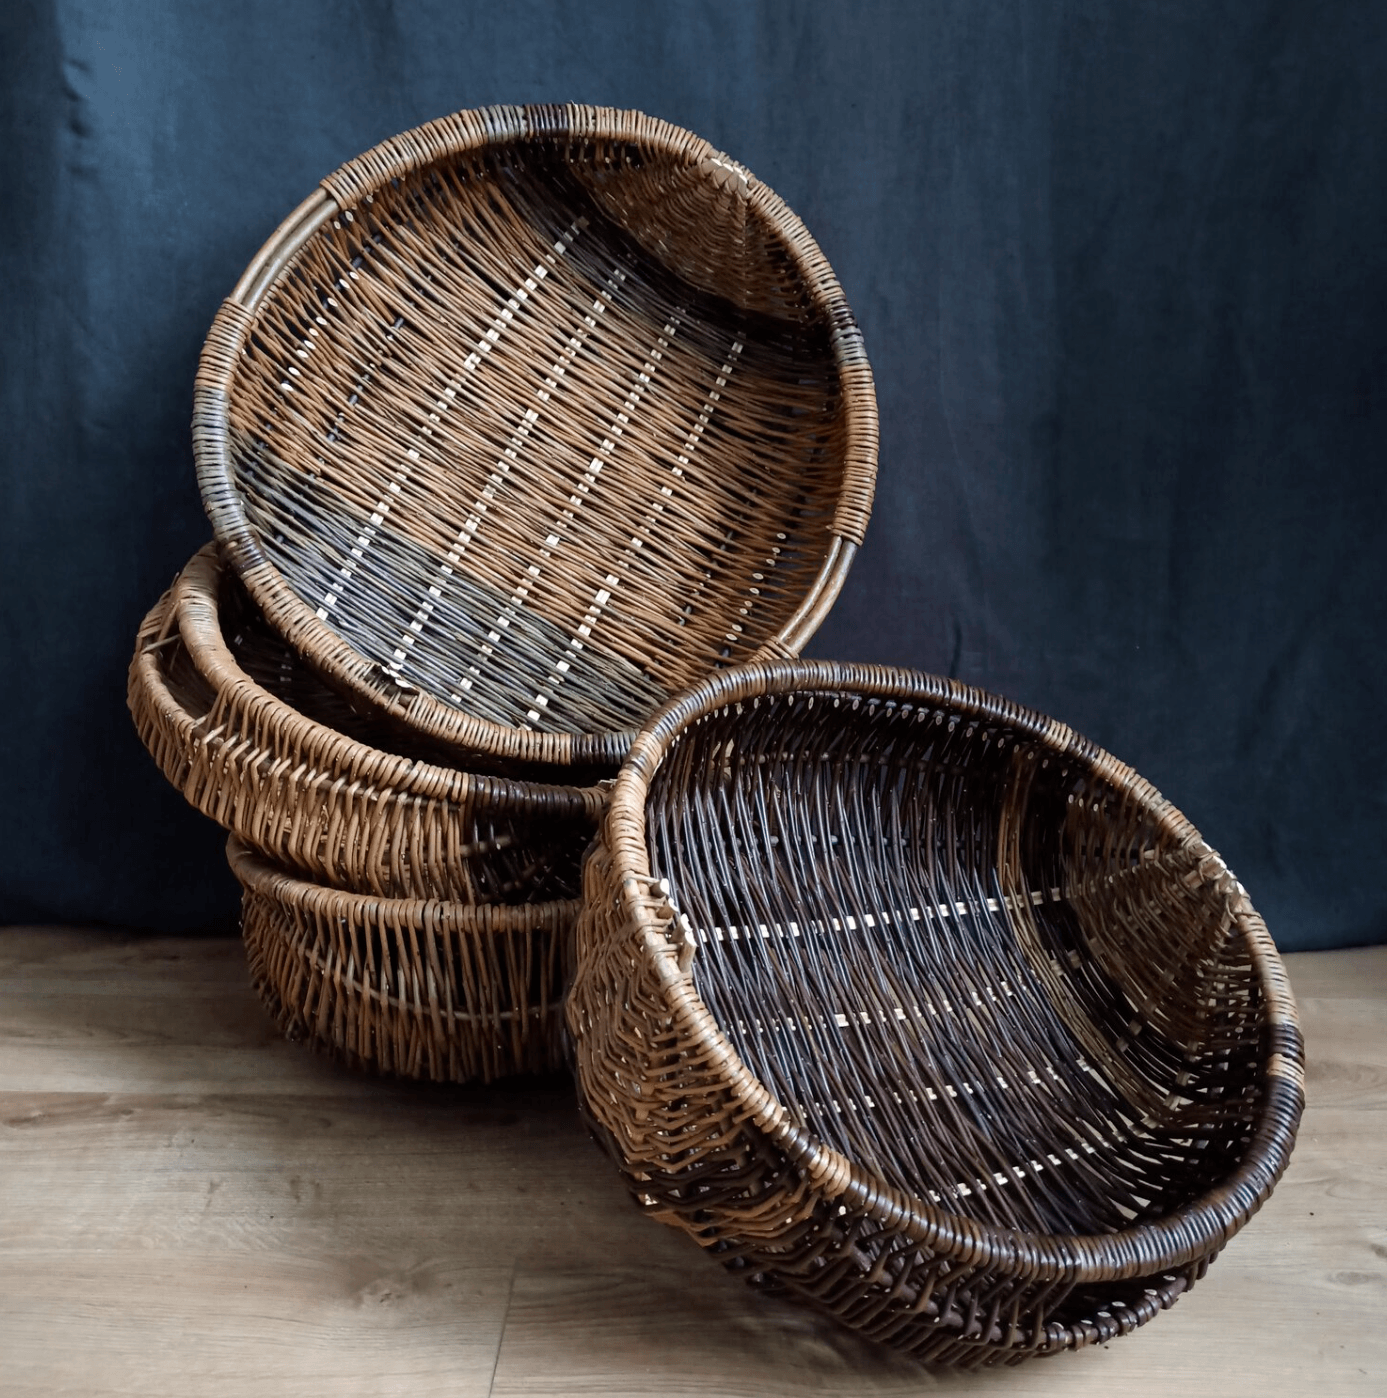 Emilio, the master basket maker. Elaboration with wicker of baskets and  other artisan pieces 